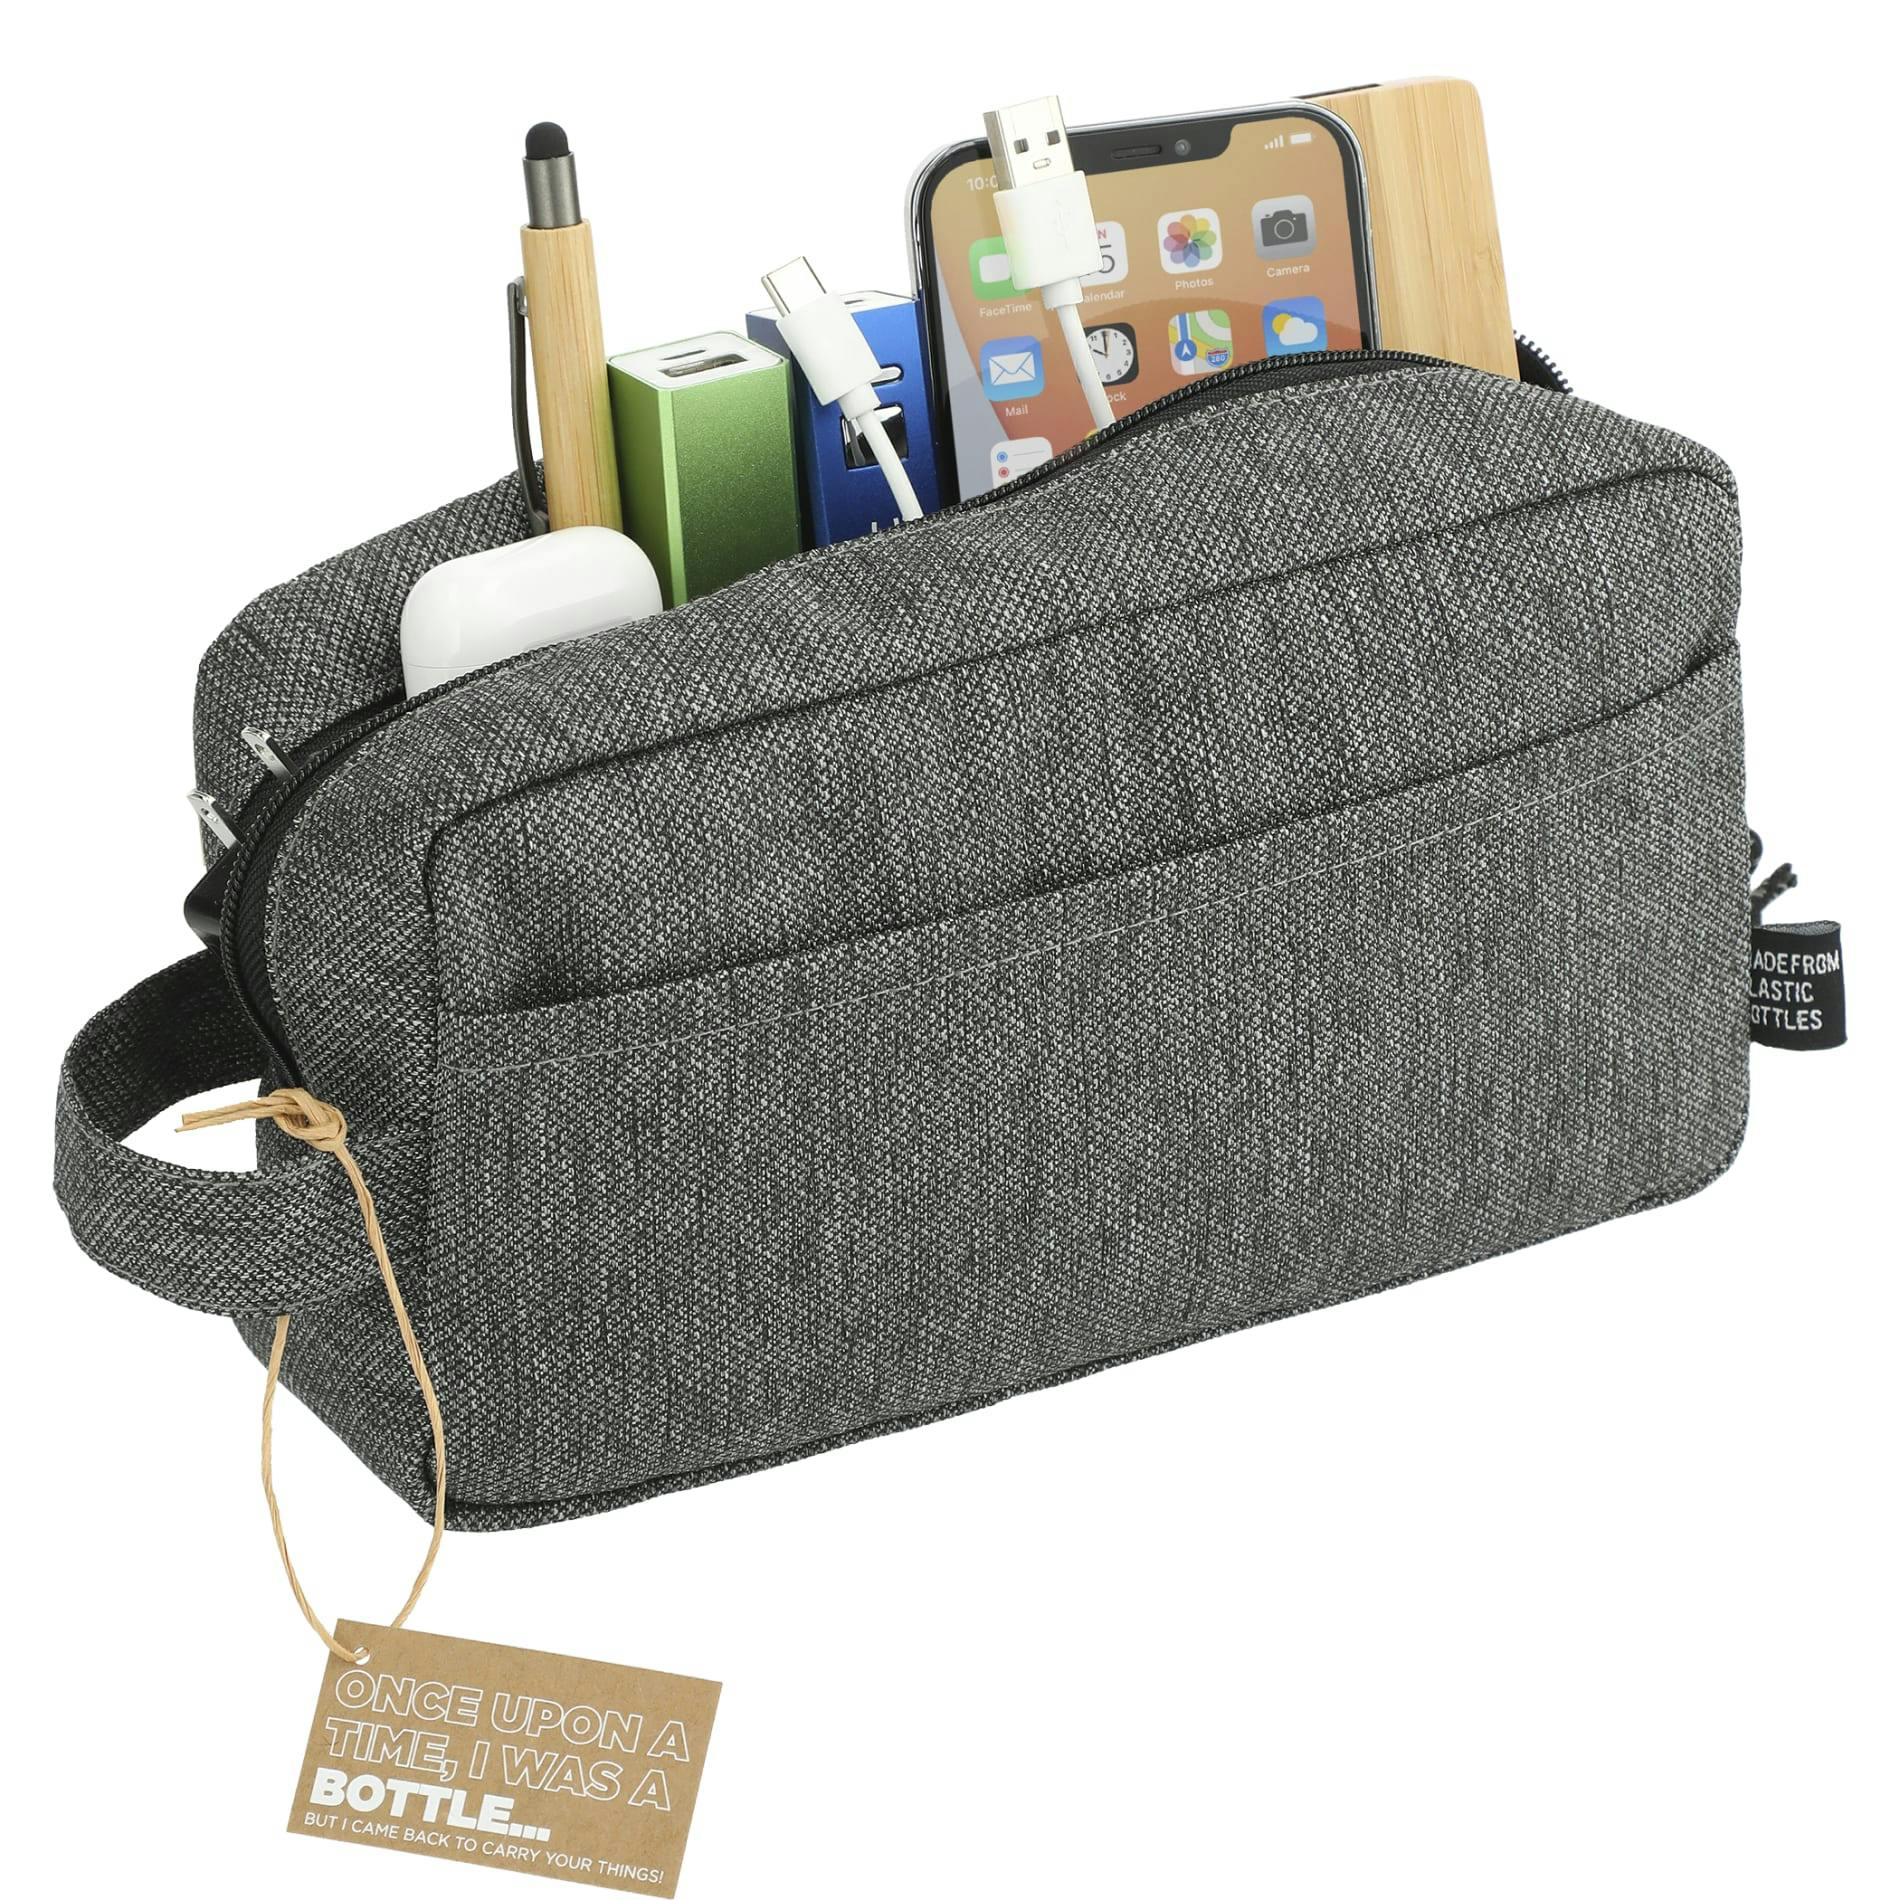 Vila Recycled Dopp Kit Pouch - additional Image 5